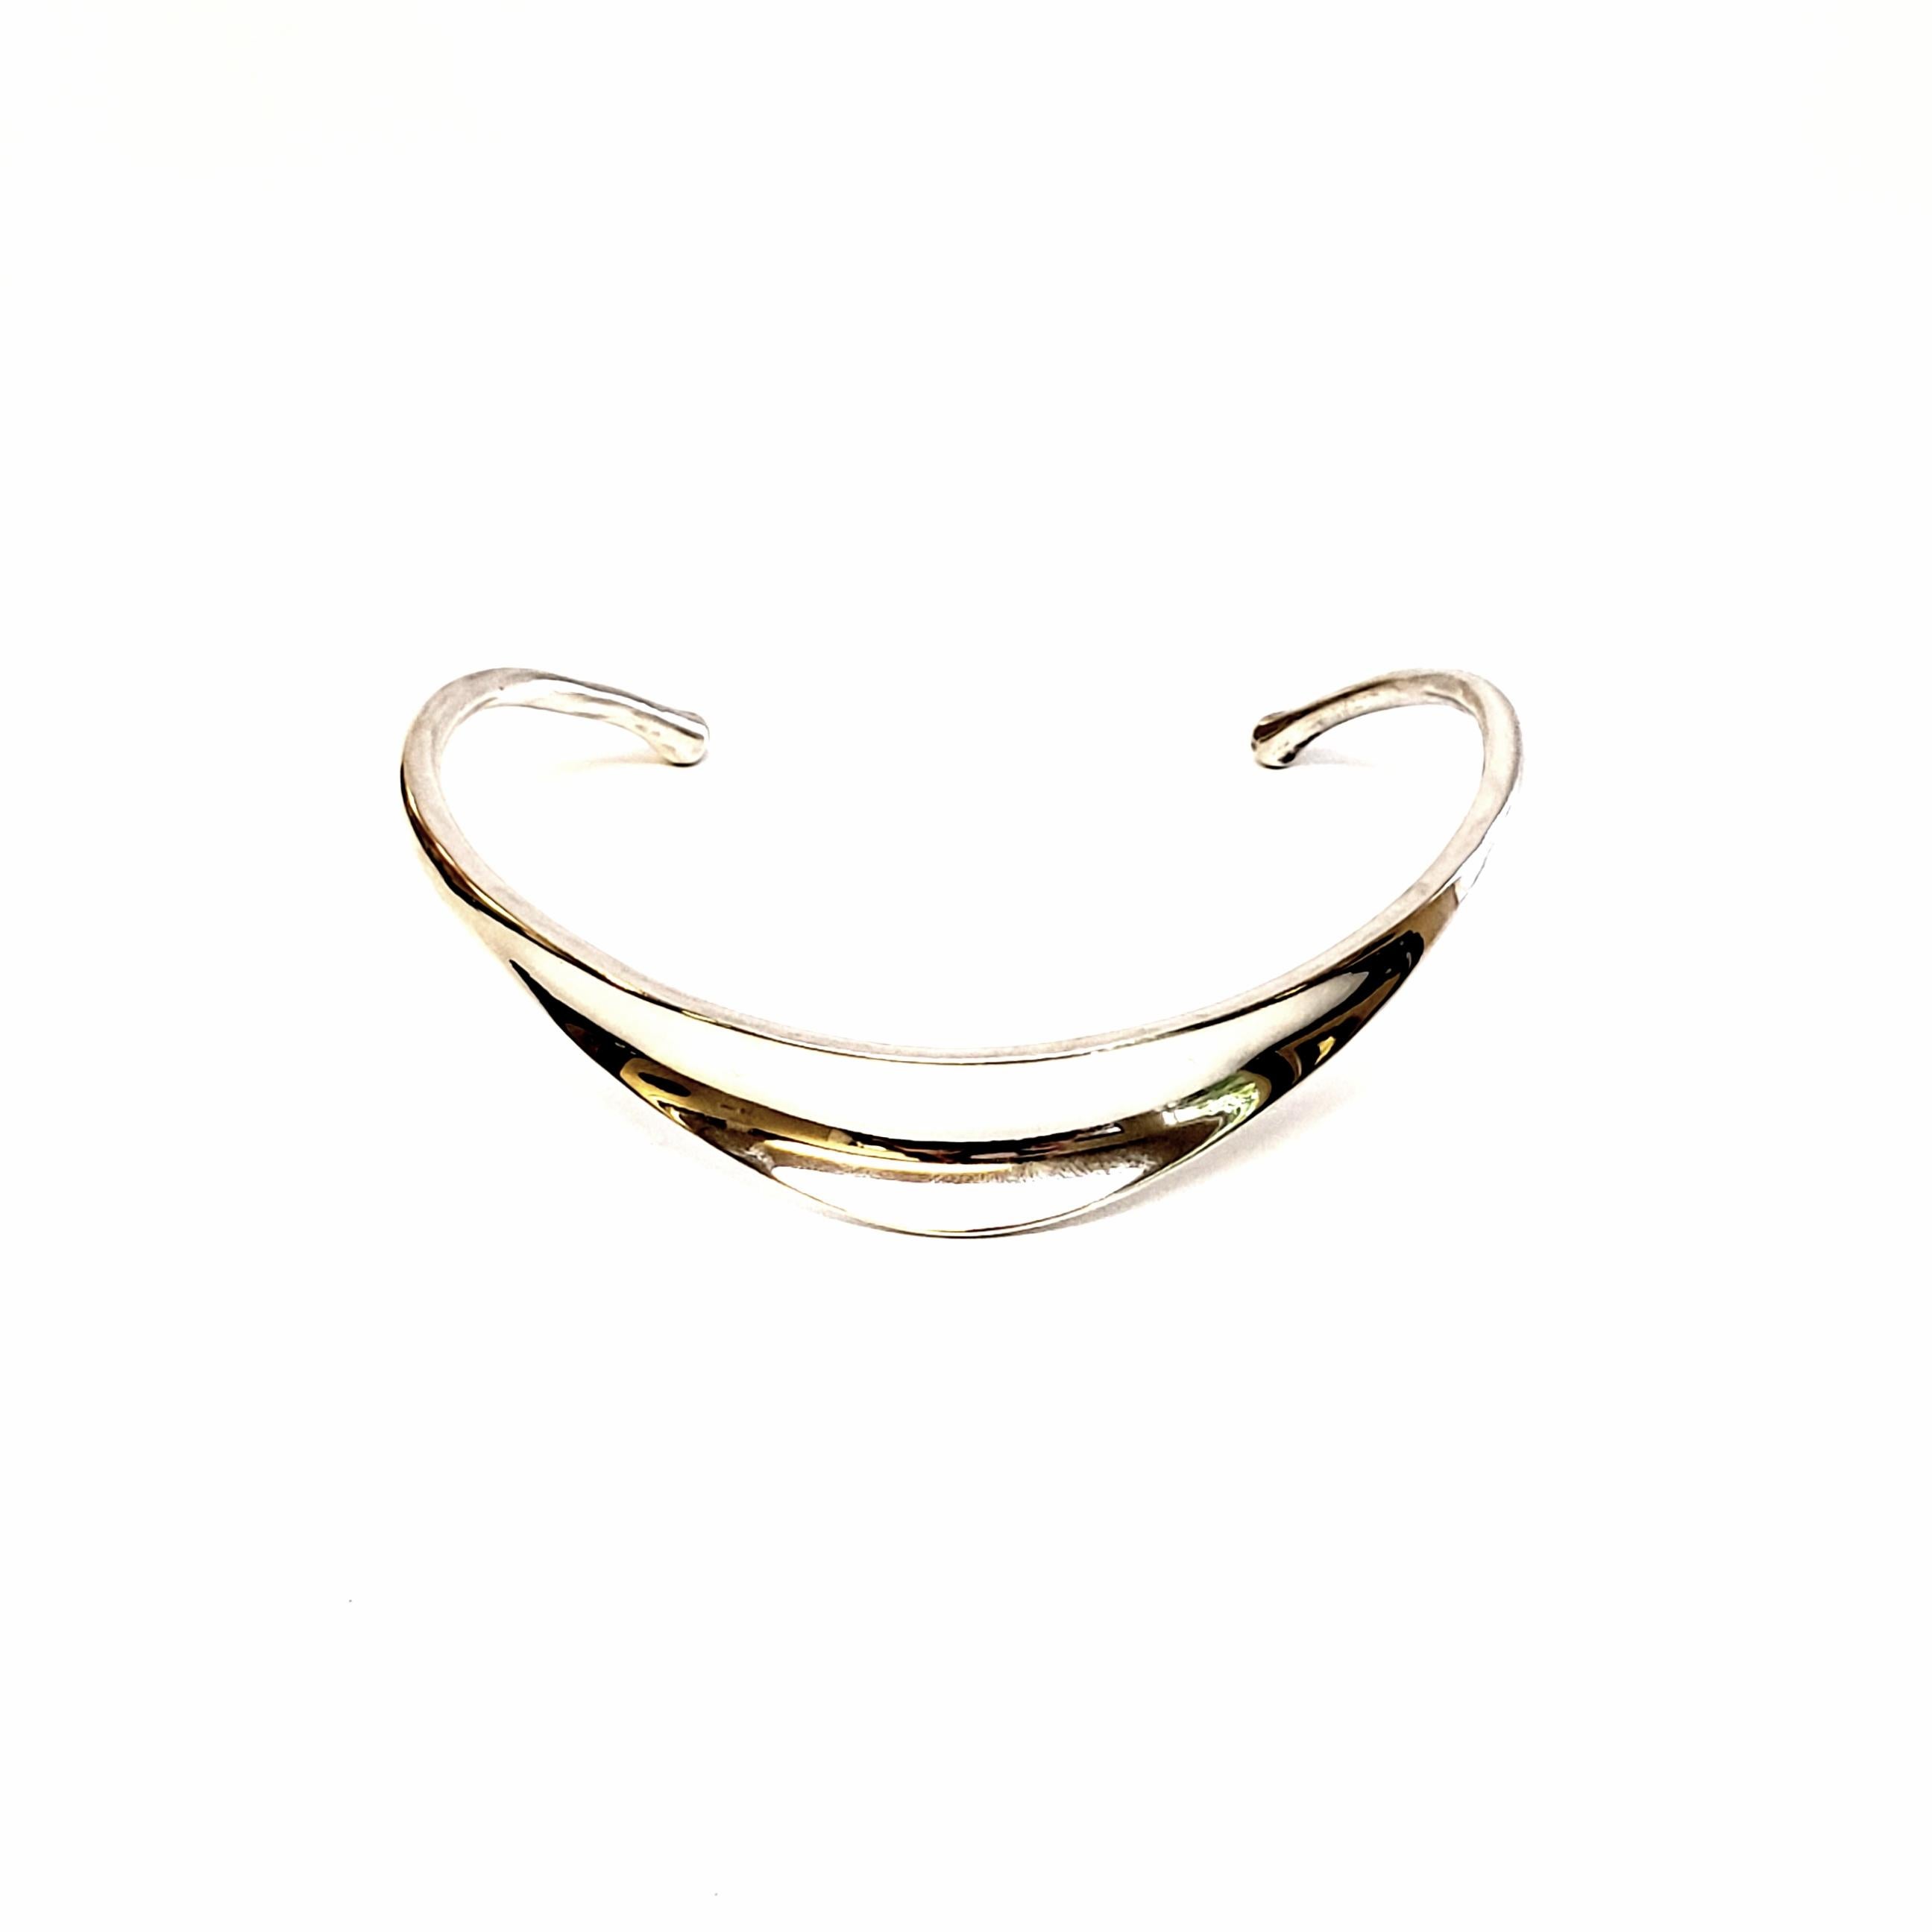 Vintage Bent Knudsen sterling silver Neck Ring/Choker.

This piece shows impressive silver work with a modernist, concave design, by Bent Knudsen of Copenhagen, Denmark, circa 1960s.

Measures 11 1/2